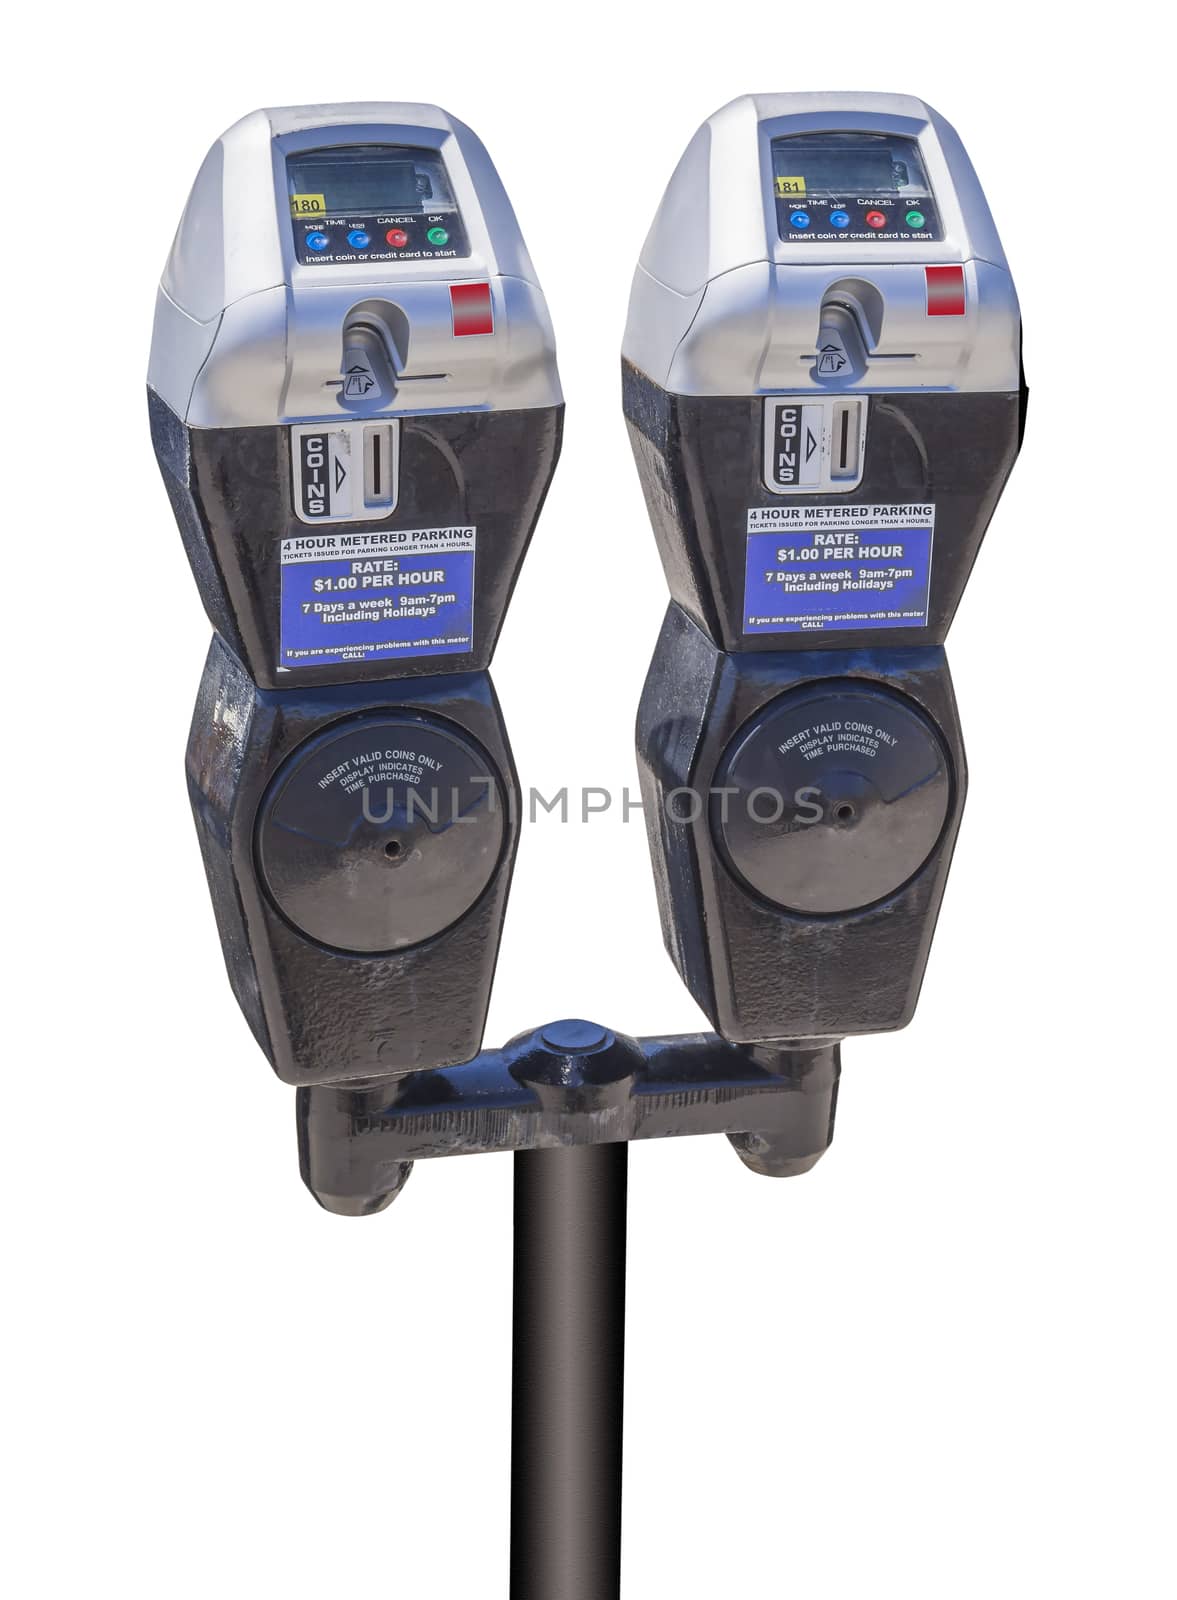 New parking meters that accept credit cards, isolated with clipping path